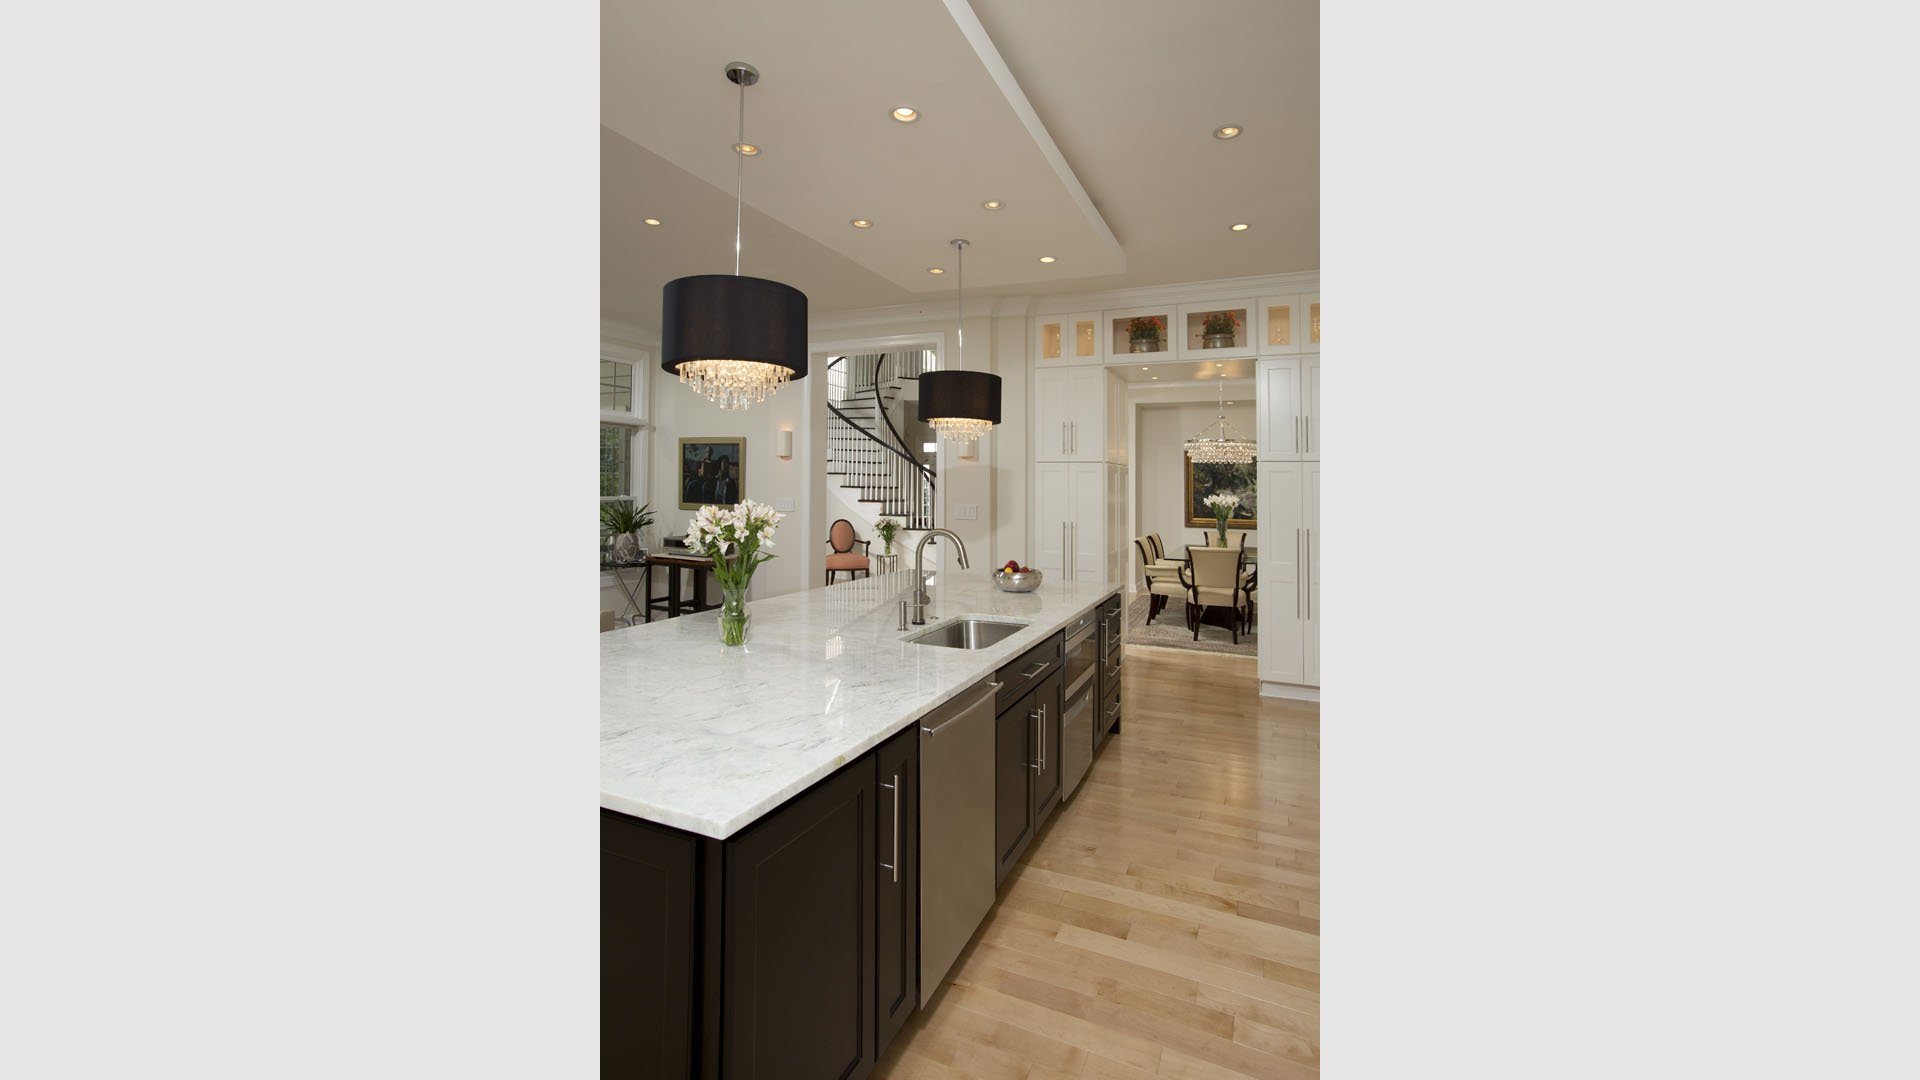 2014 NAHB, Best of American Living Awards (BALA) Silver Award Winner, Entire Home Remodel up to $250,000